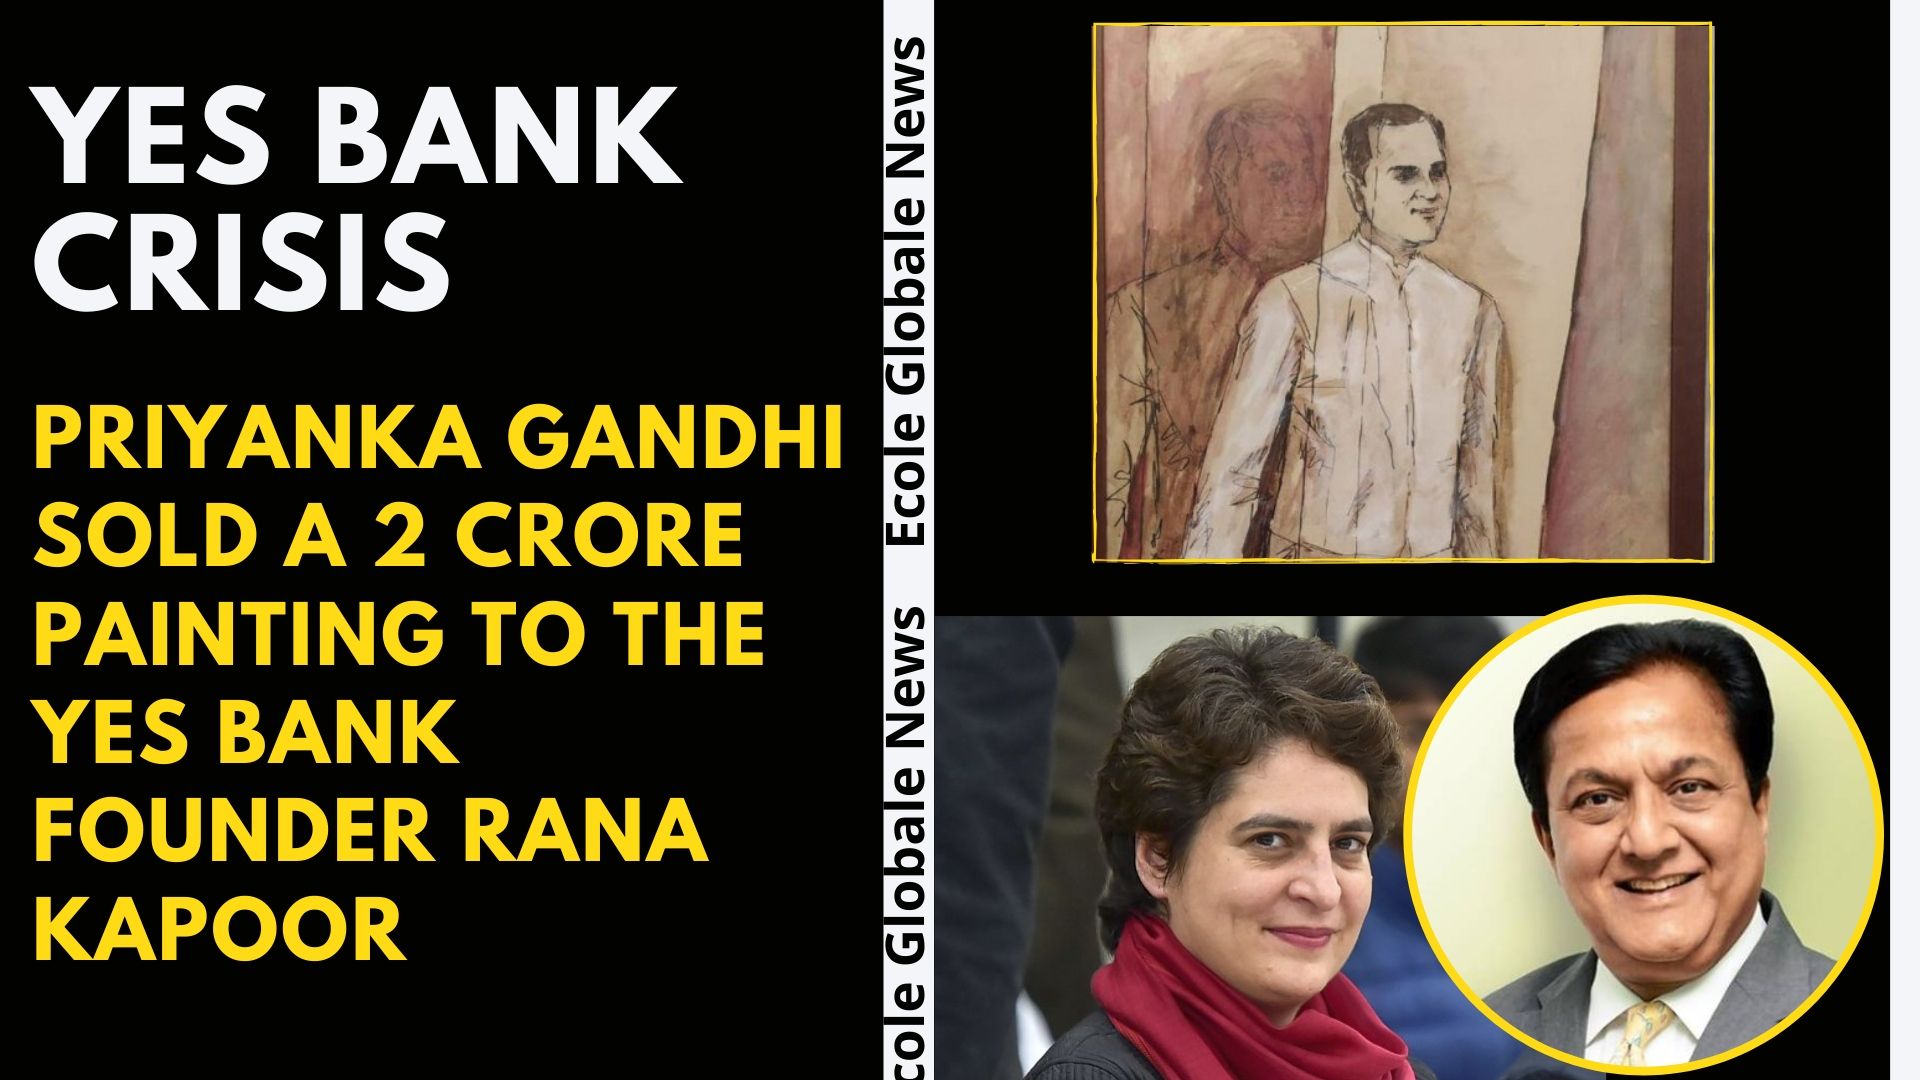 You are currently viewing YES BANK CRISIS: PRIYANKA GANDHI SOLD A 2 CRORE PAINTING TO THE YES BANK FOUNDER RANA KAPOOR